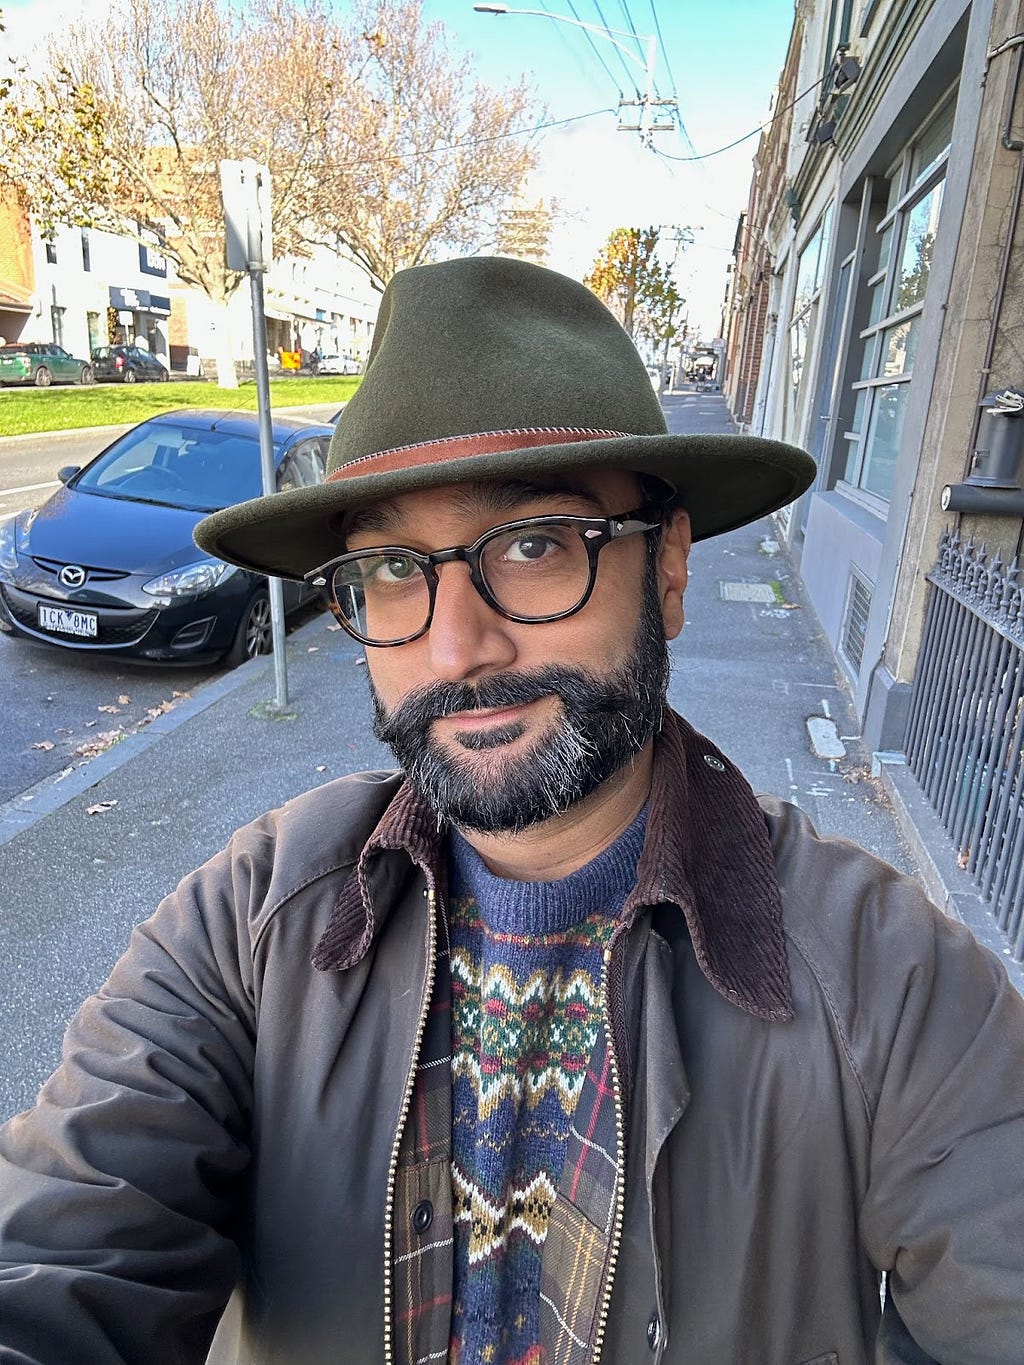 Selfie of brown man with beard, glasses, green felt fedora, wearing waxed cotton jacket. Standing in street with parked cars.